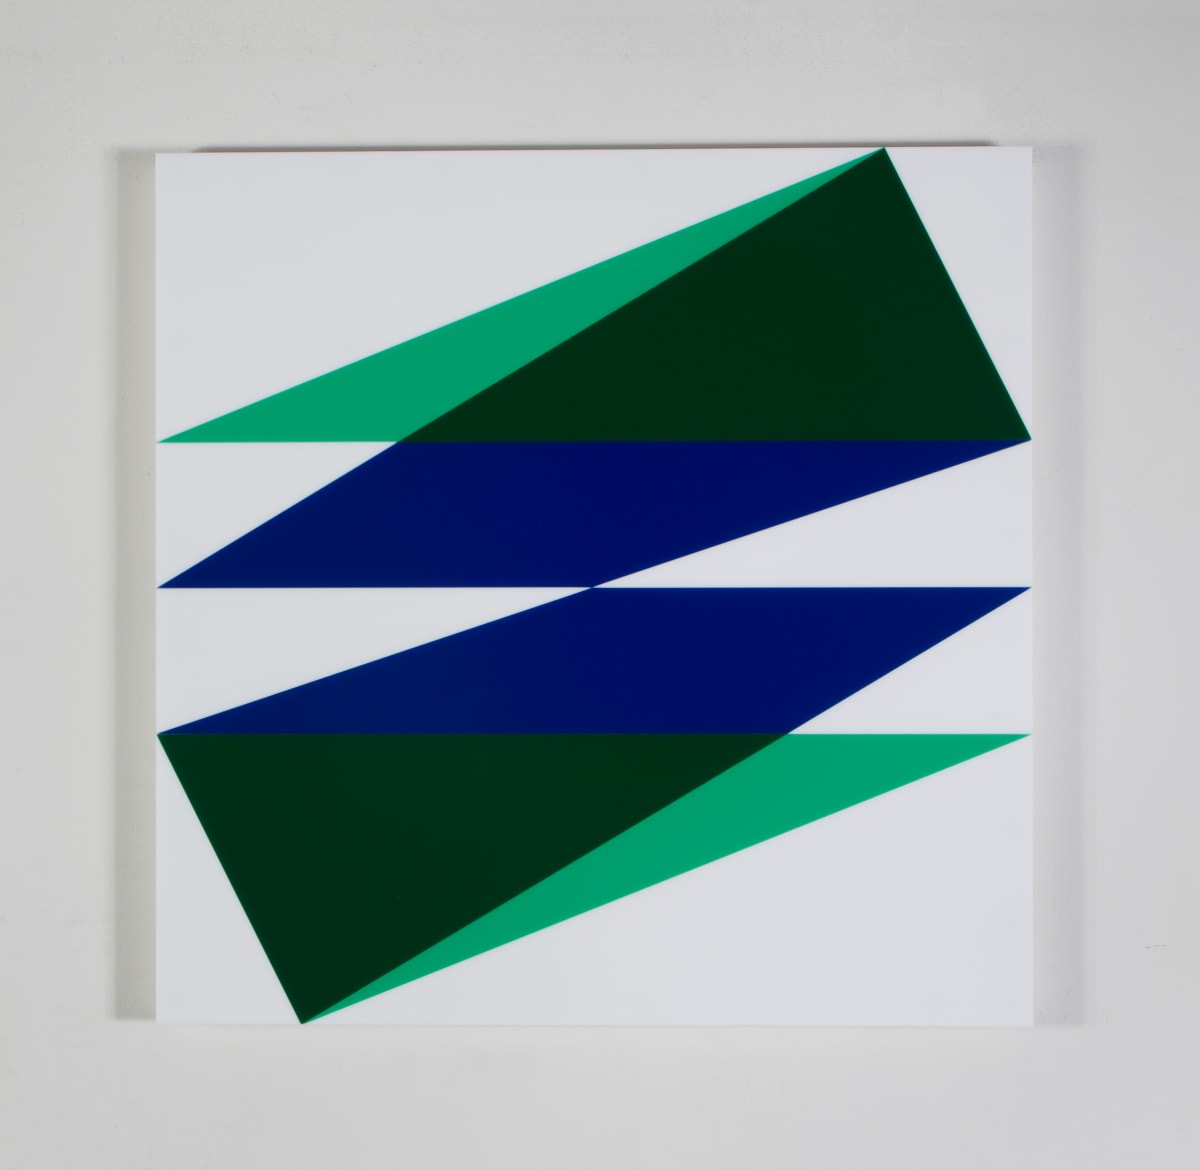 Composition in 2024 Green, 2108 Green, 2114 Blue and 7508M White by Brian Zink 